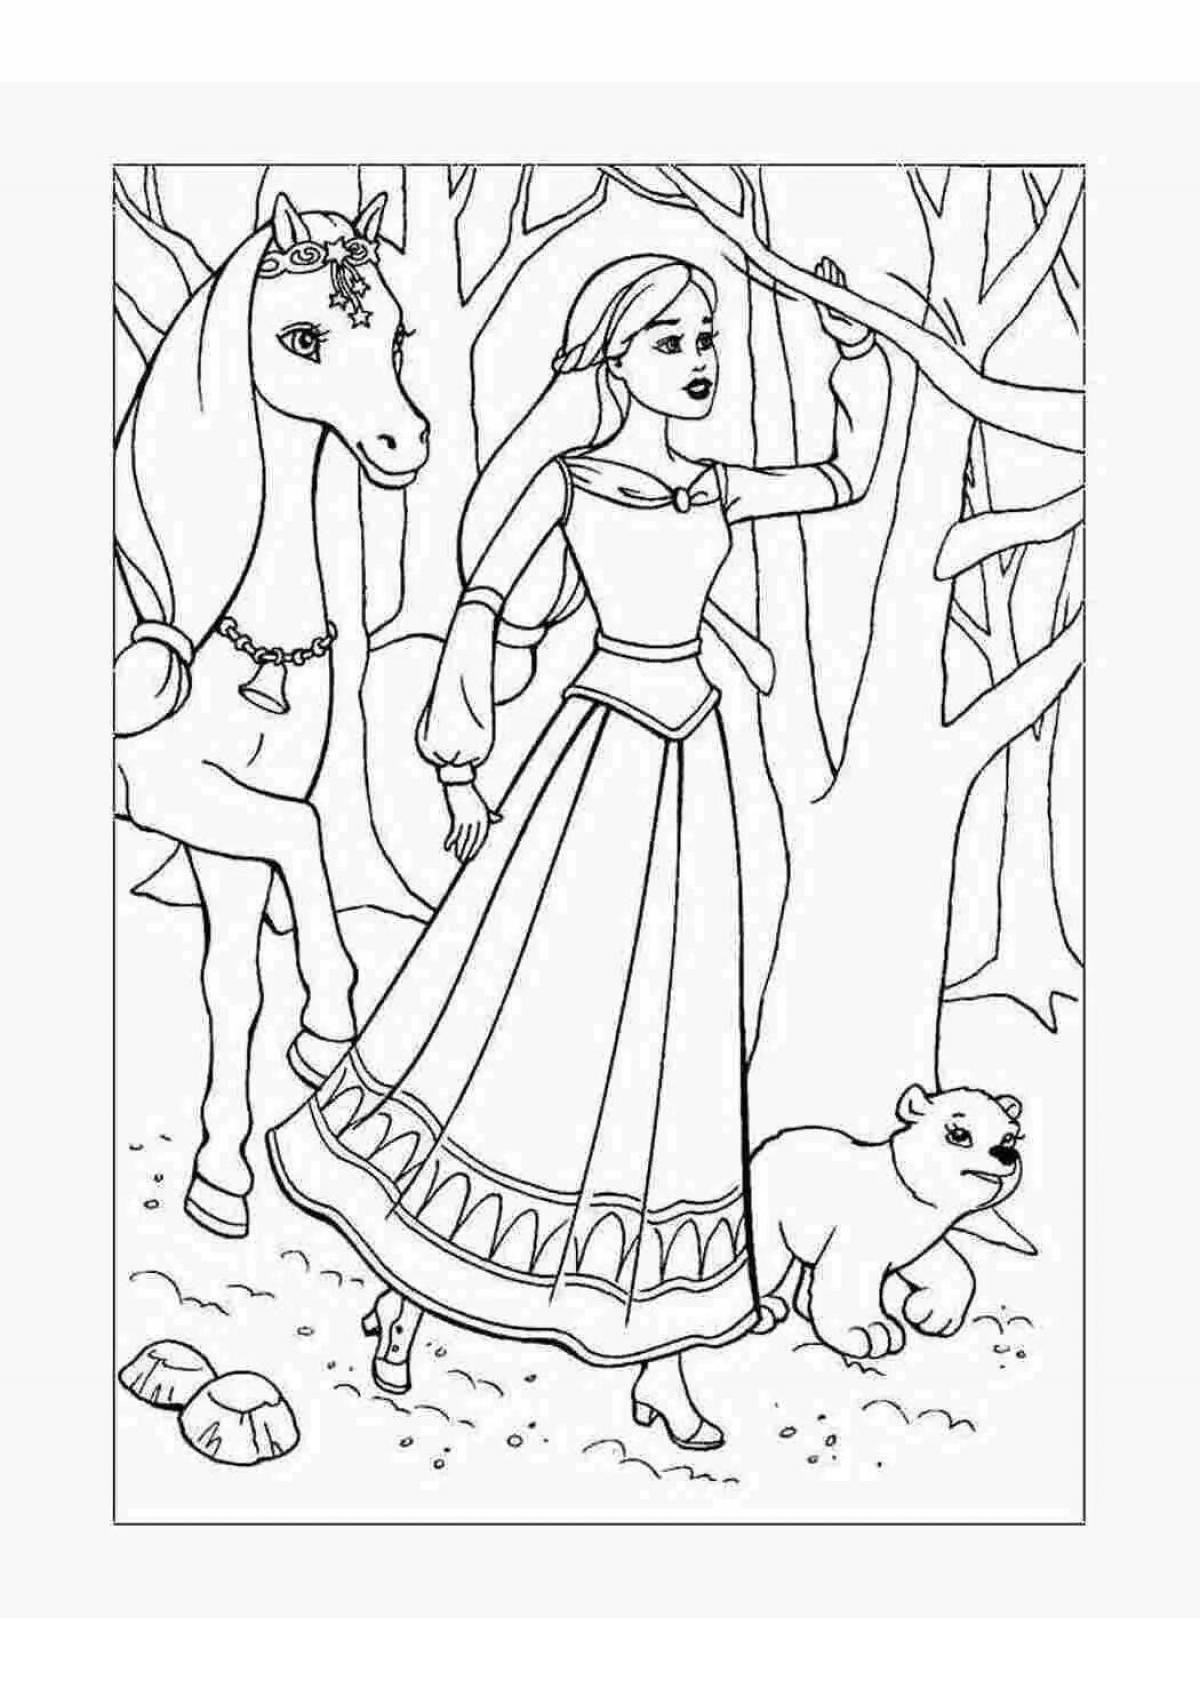 Bright barbie with animals coloring book